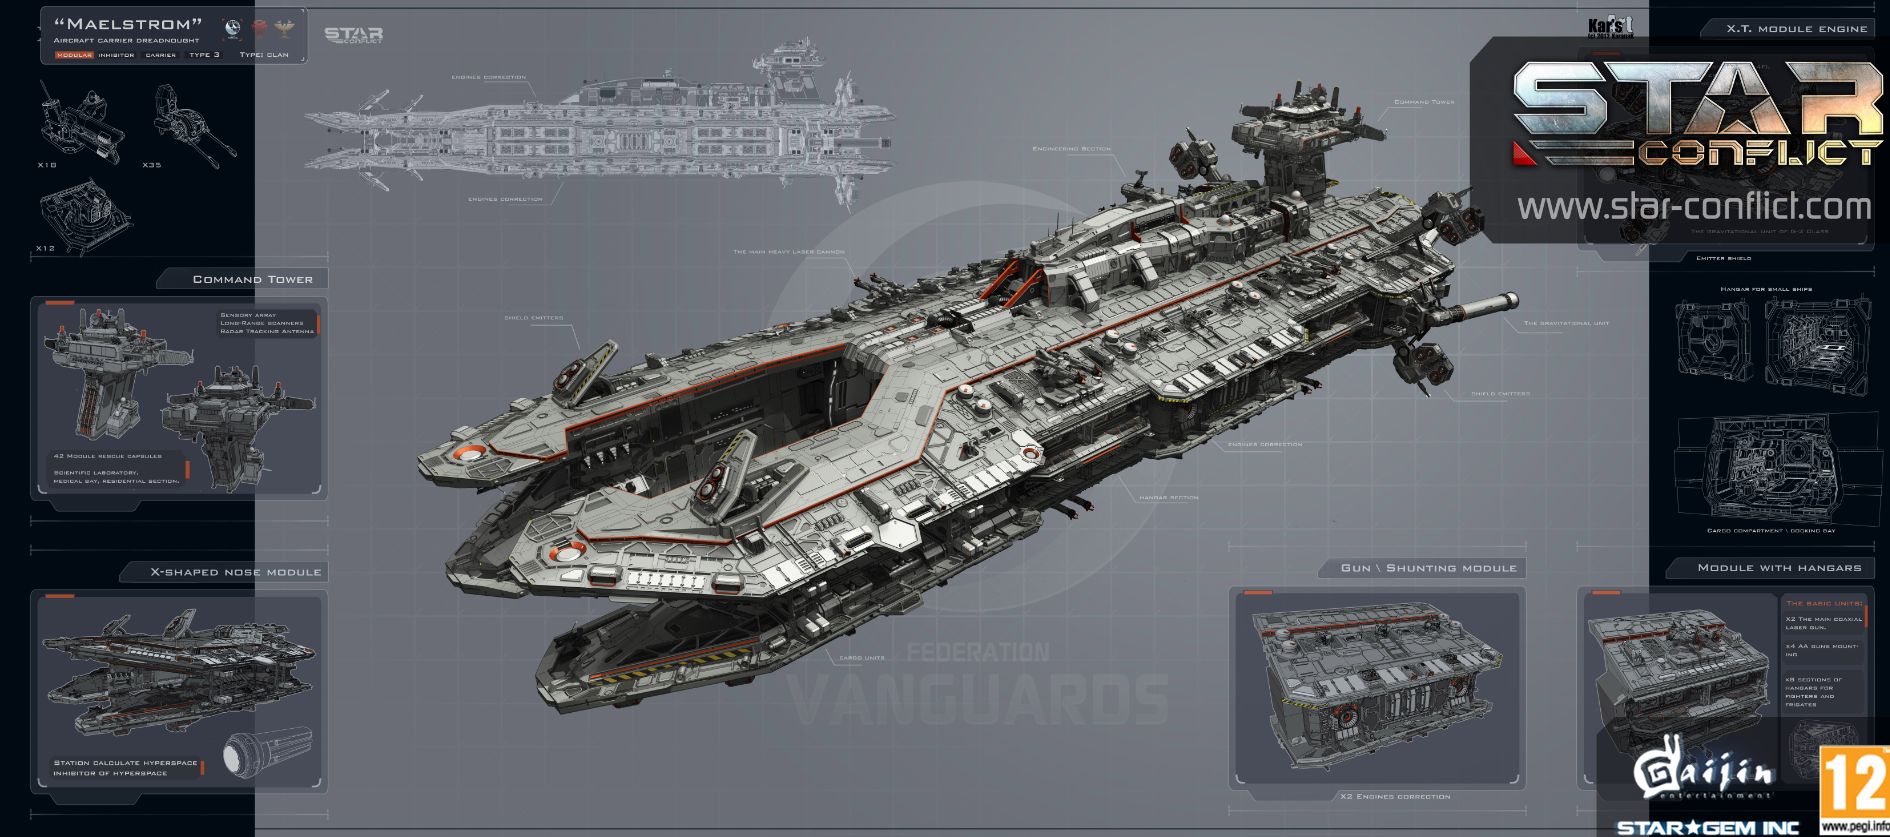 StarConflict Dreadnought